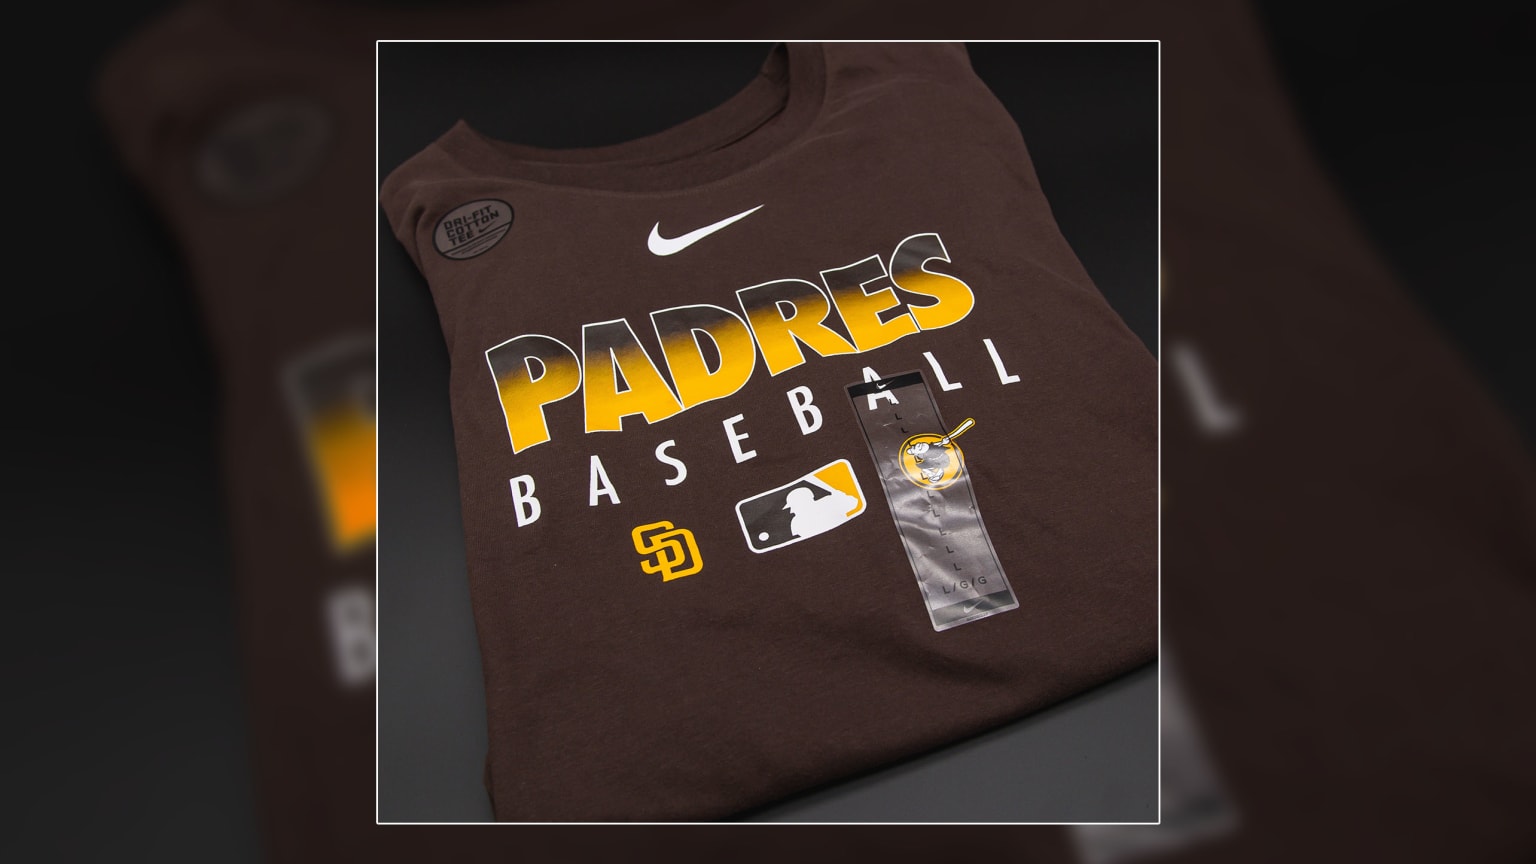 padres store hours